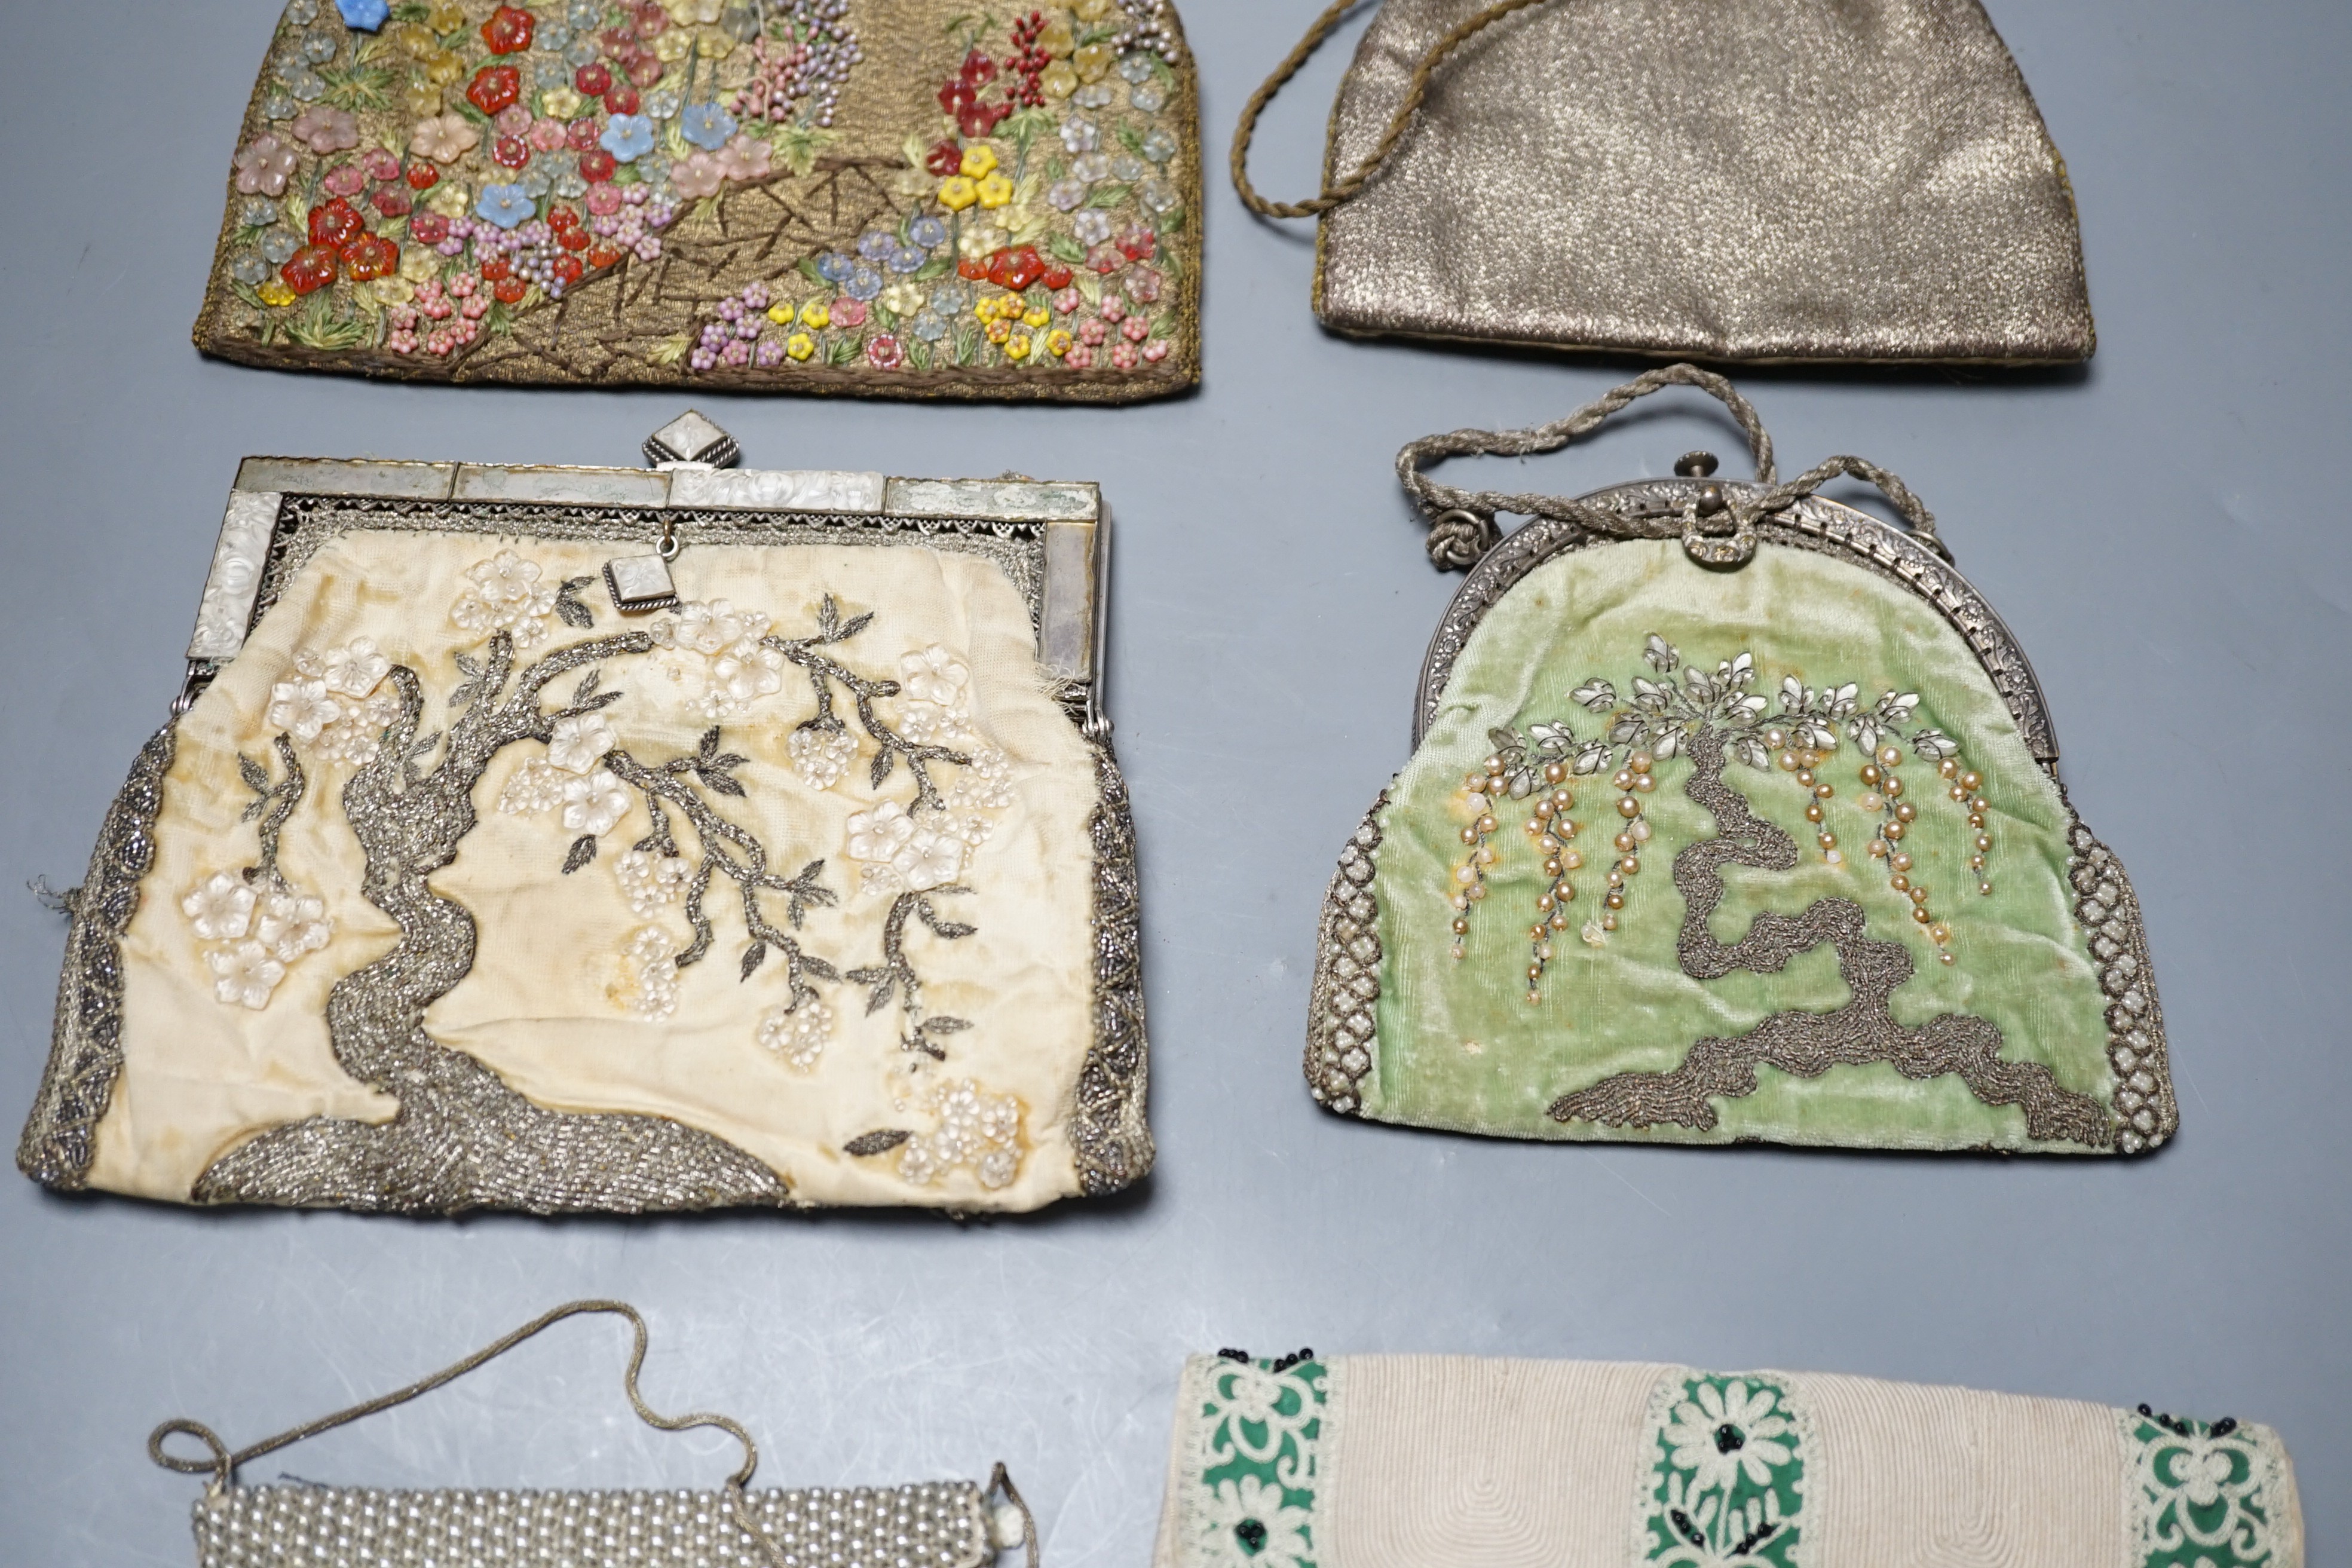 Four hand made evening bags with applice designs, a chain stitch clutch bag and a small bead work - Image 3 of 8